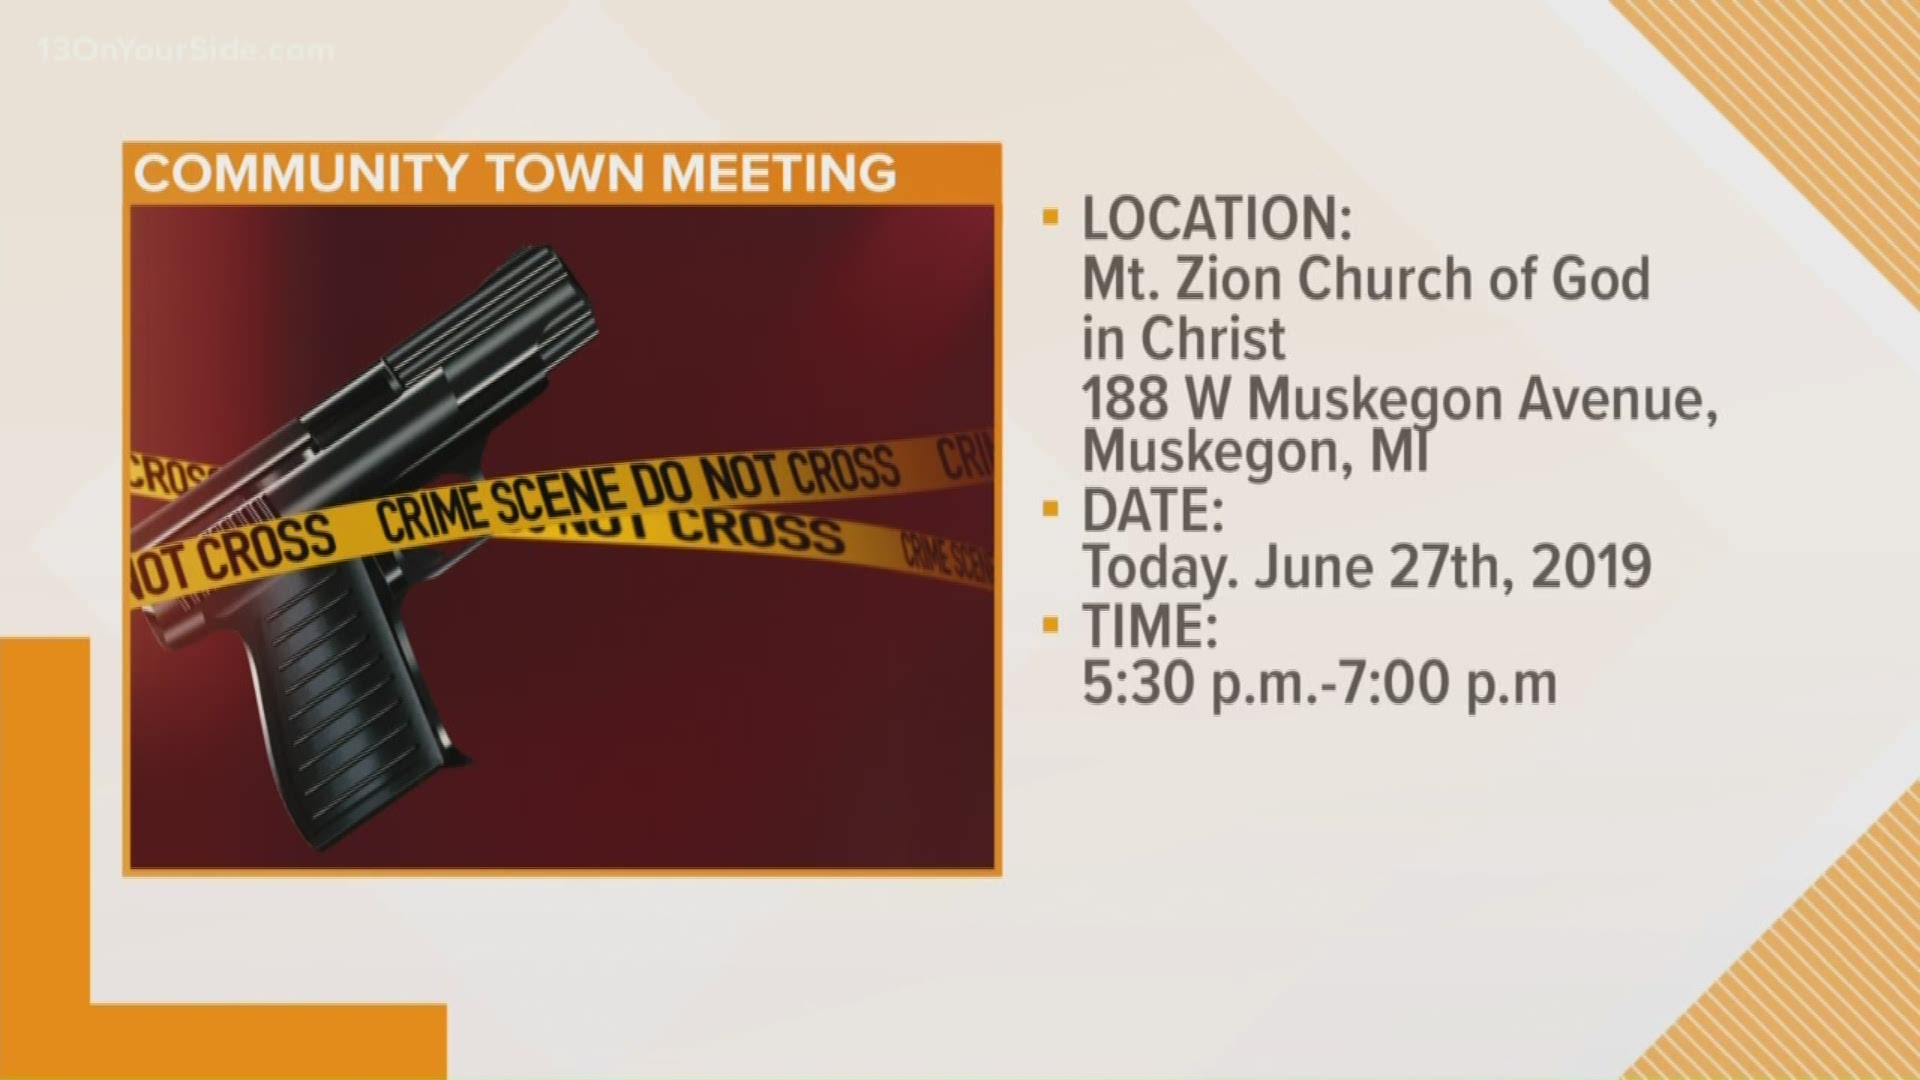 City leaders, police officers, community members, business owners, parents and students will attend a town hall meeting, G.U.N.S., which stands for "Gaining UNITY through Non-Violent Solutions. It's happening at Mt. Zion Church of God in Christ on W Muskegon Avenue in Muskegon.